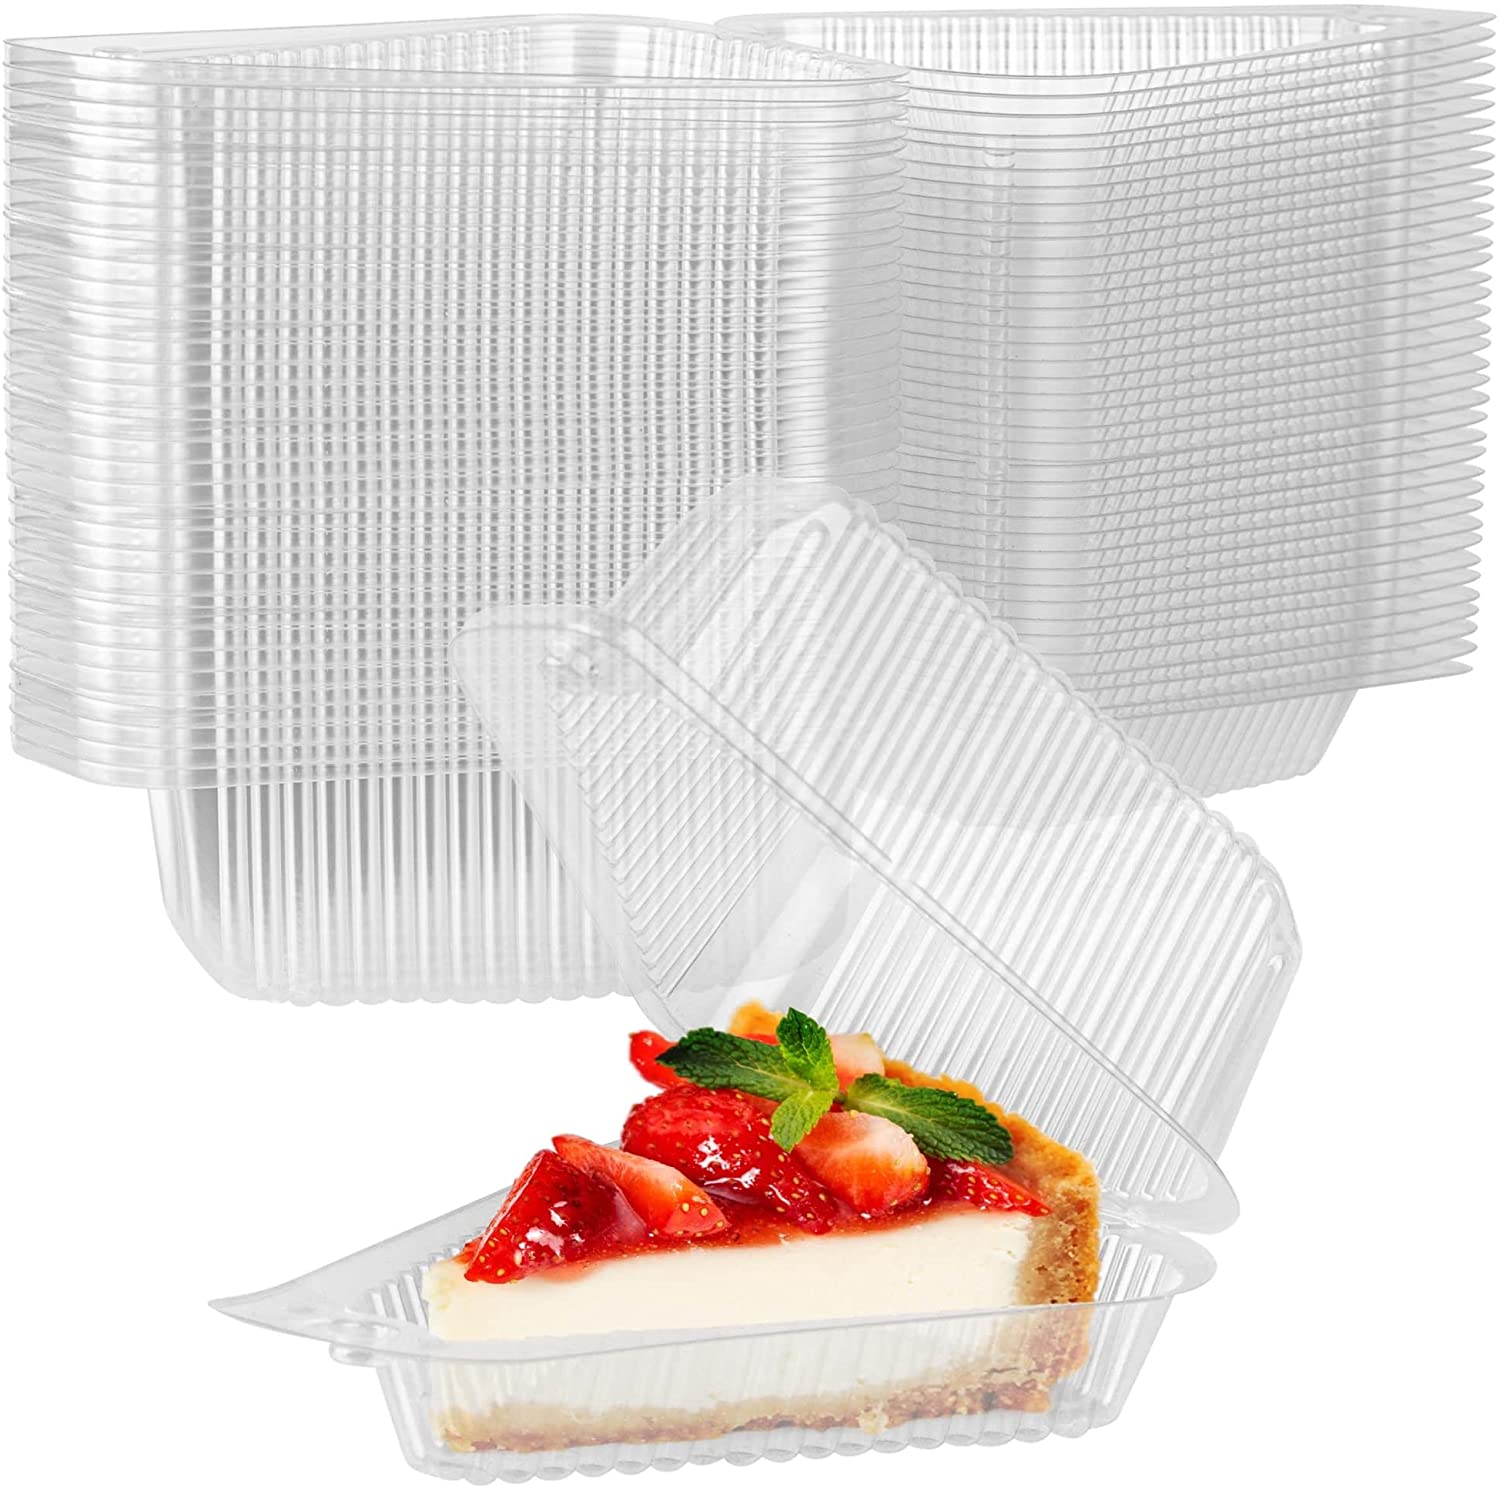 Food & Cake Containers  Disposable Plastic Food Containers